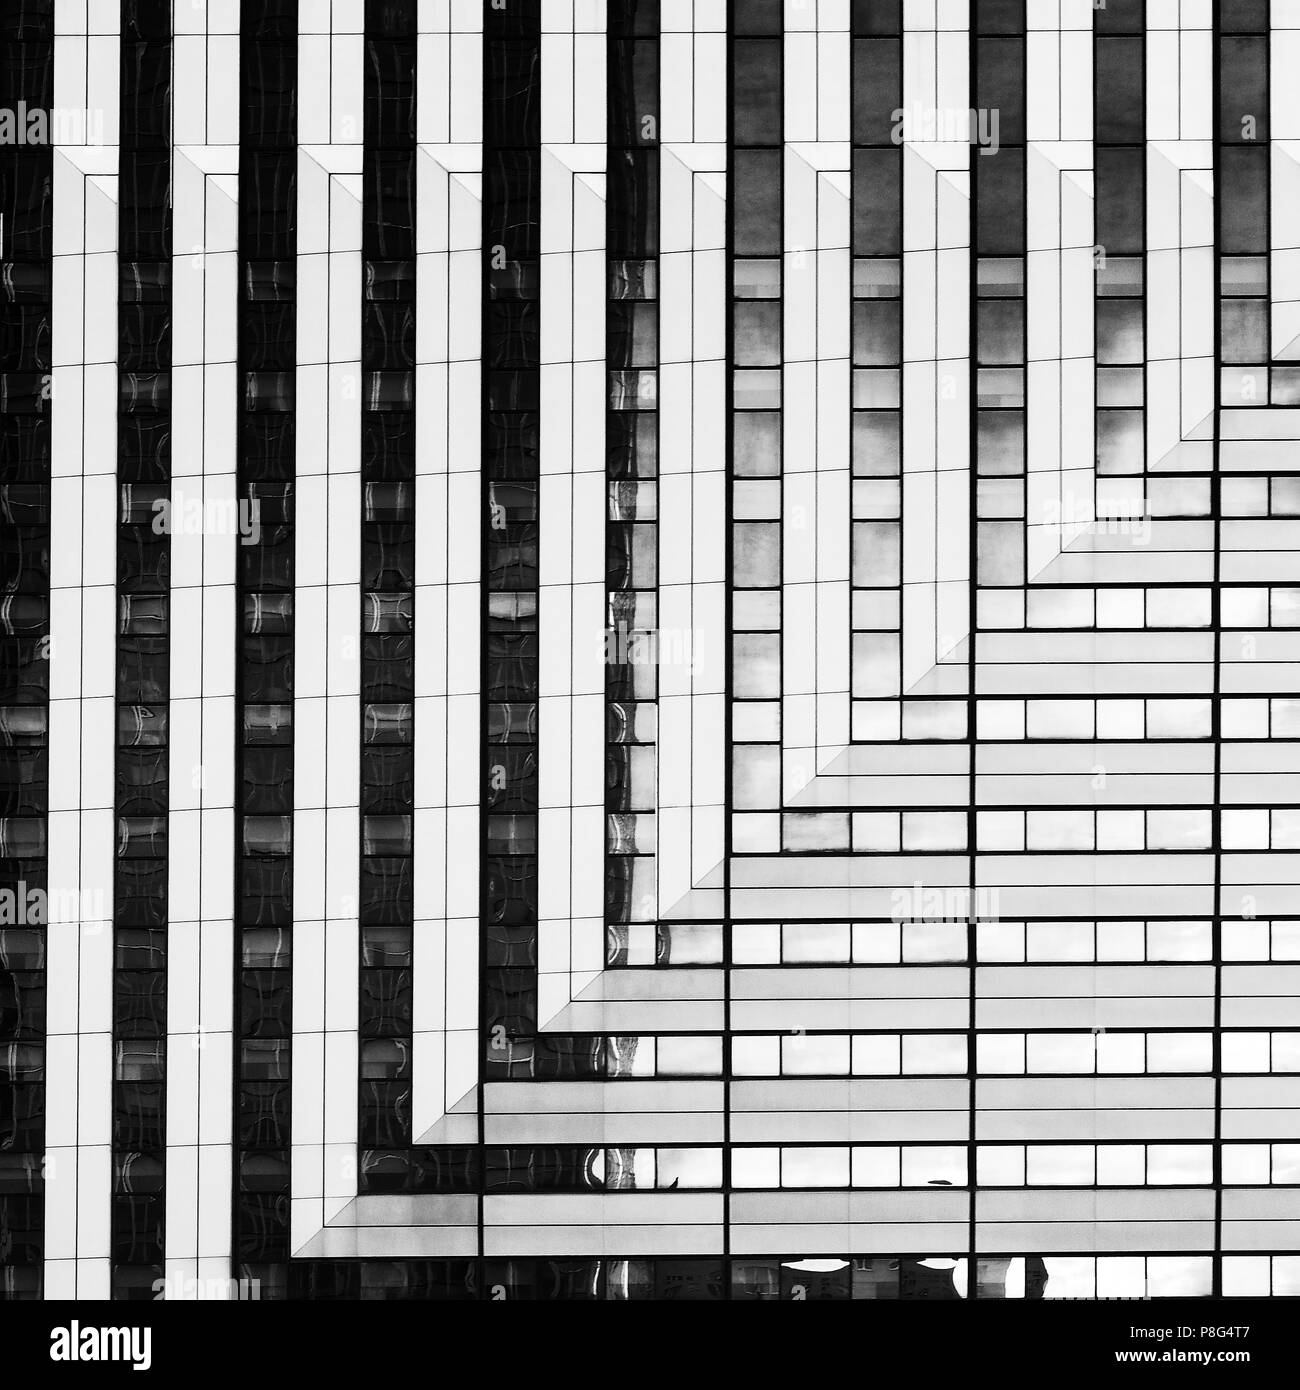 Abstract architecture in monochrome to use as background Stock Photo